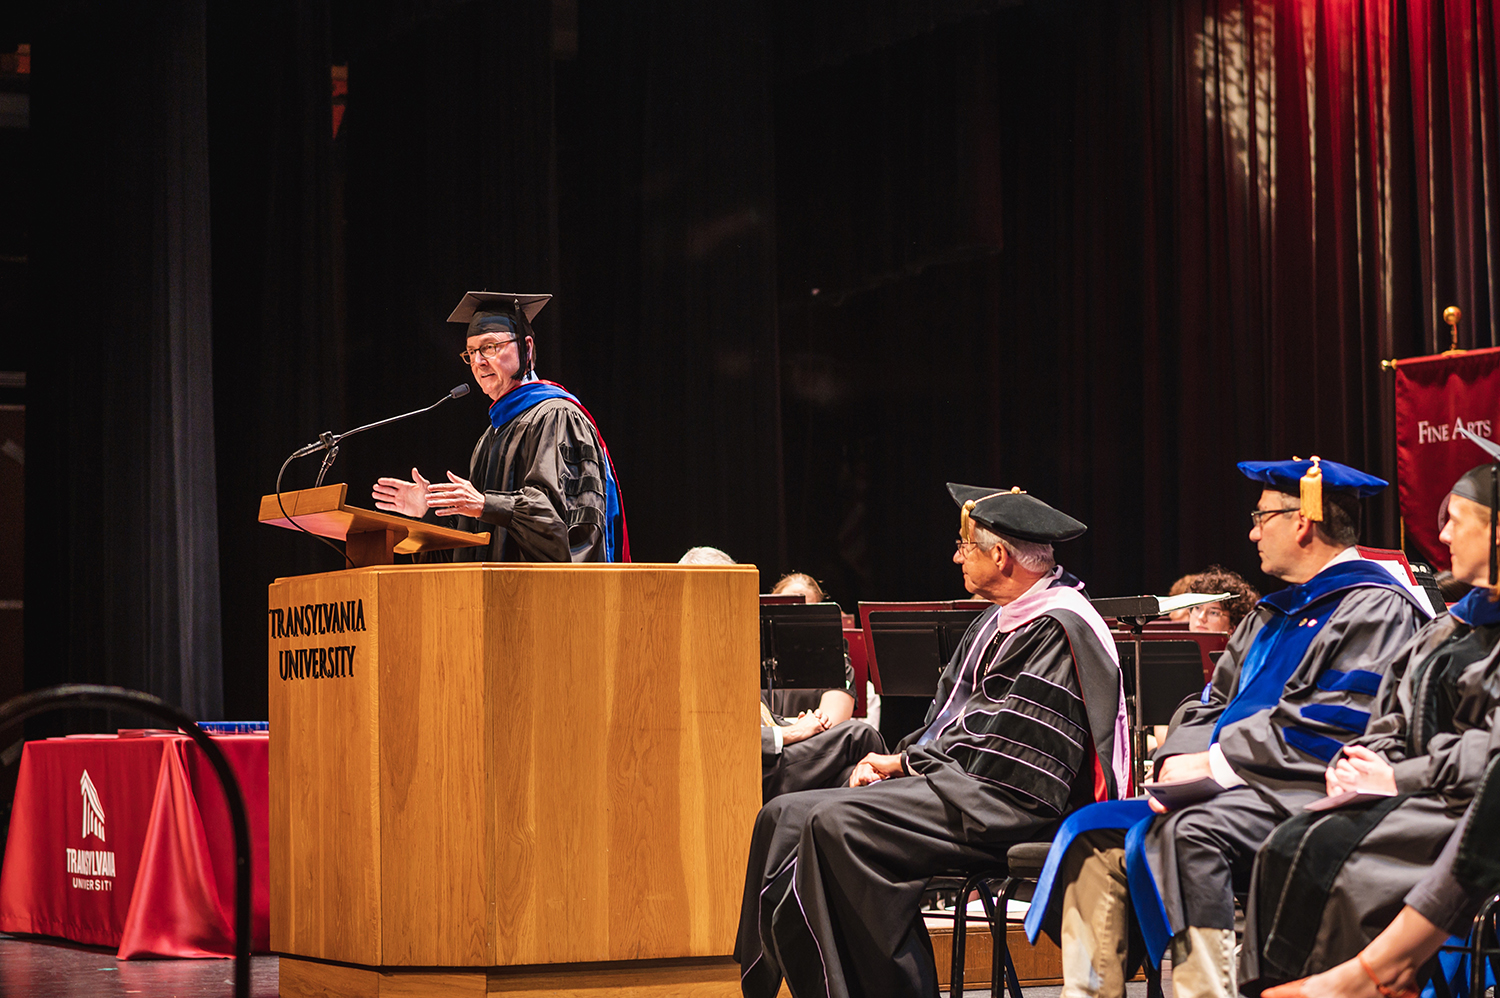 Former Lexington Mayor Jim Gray speaks on campus theme of resilience during Transylvania Academic Convocation